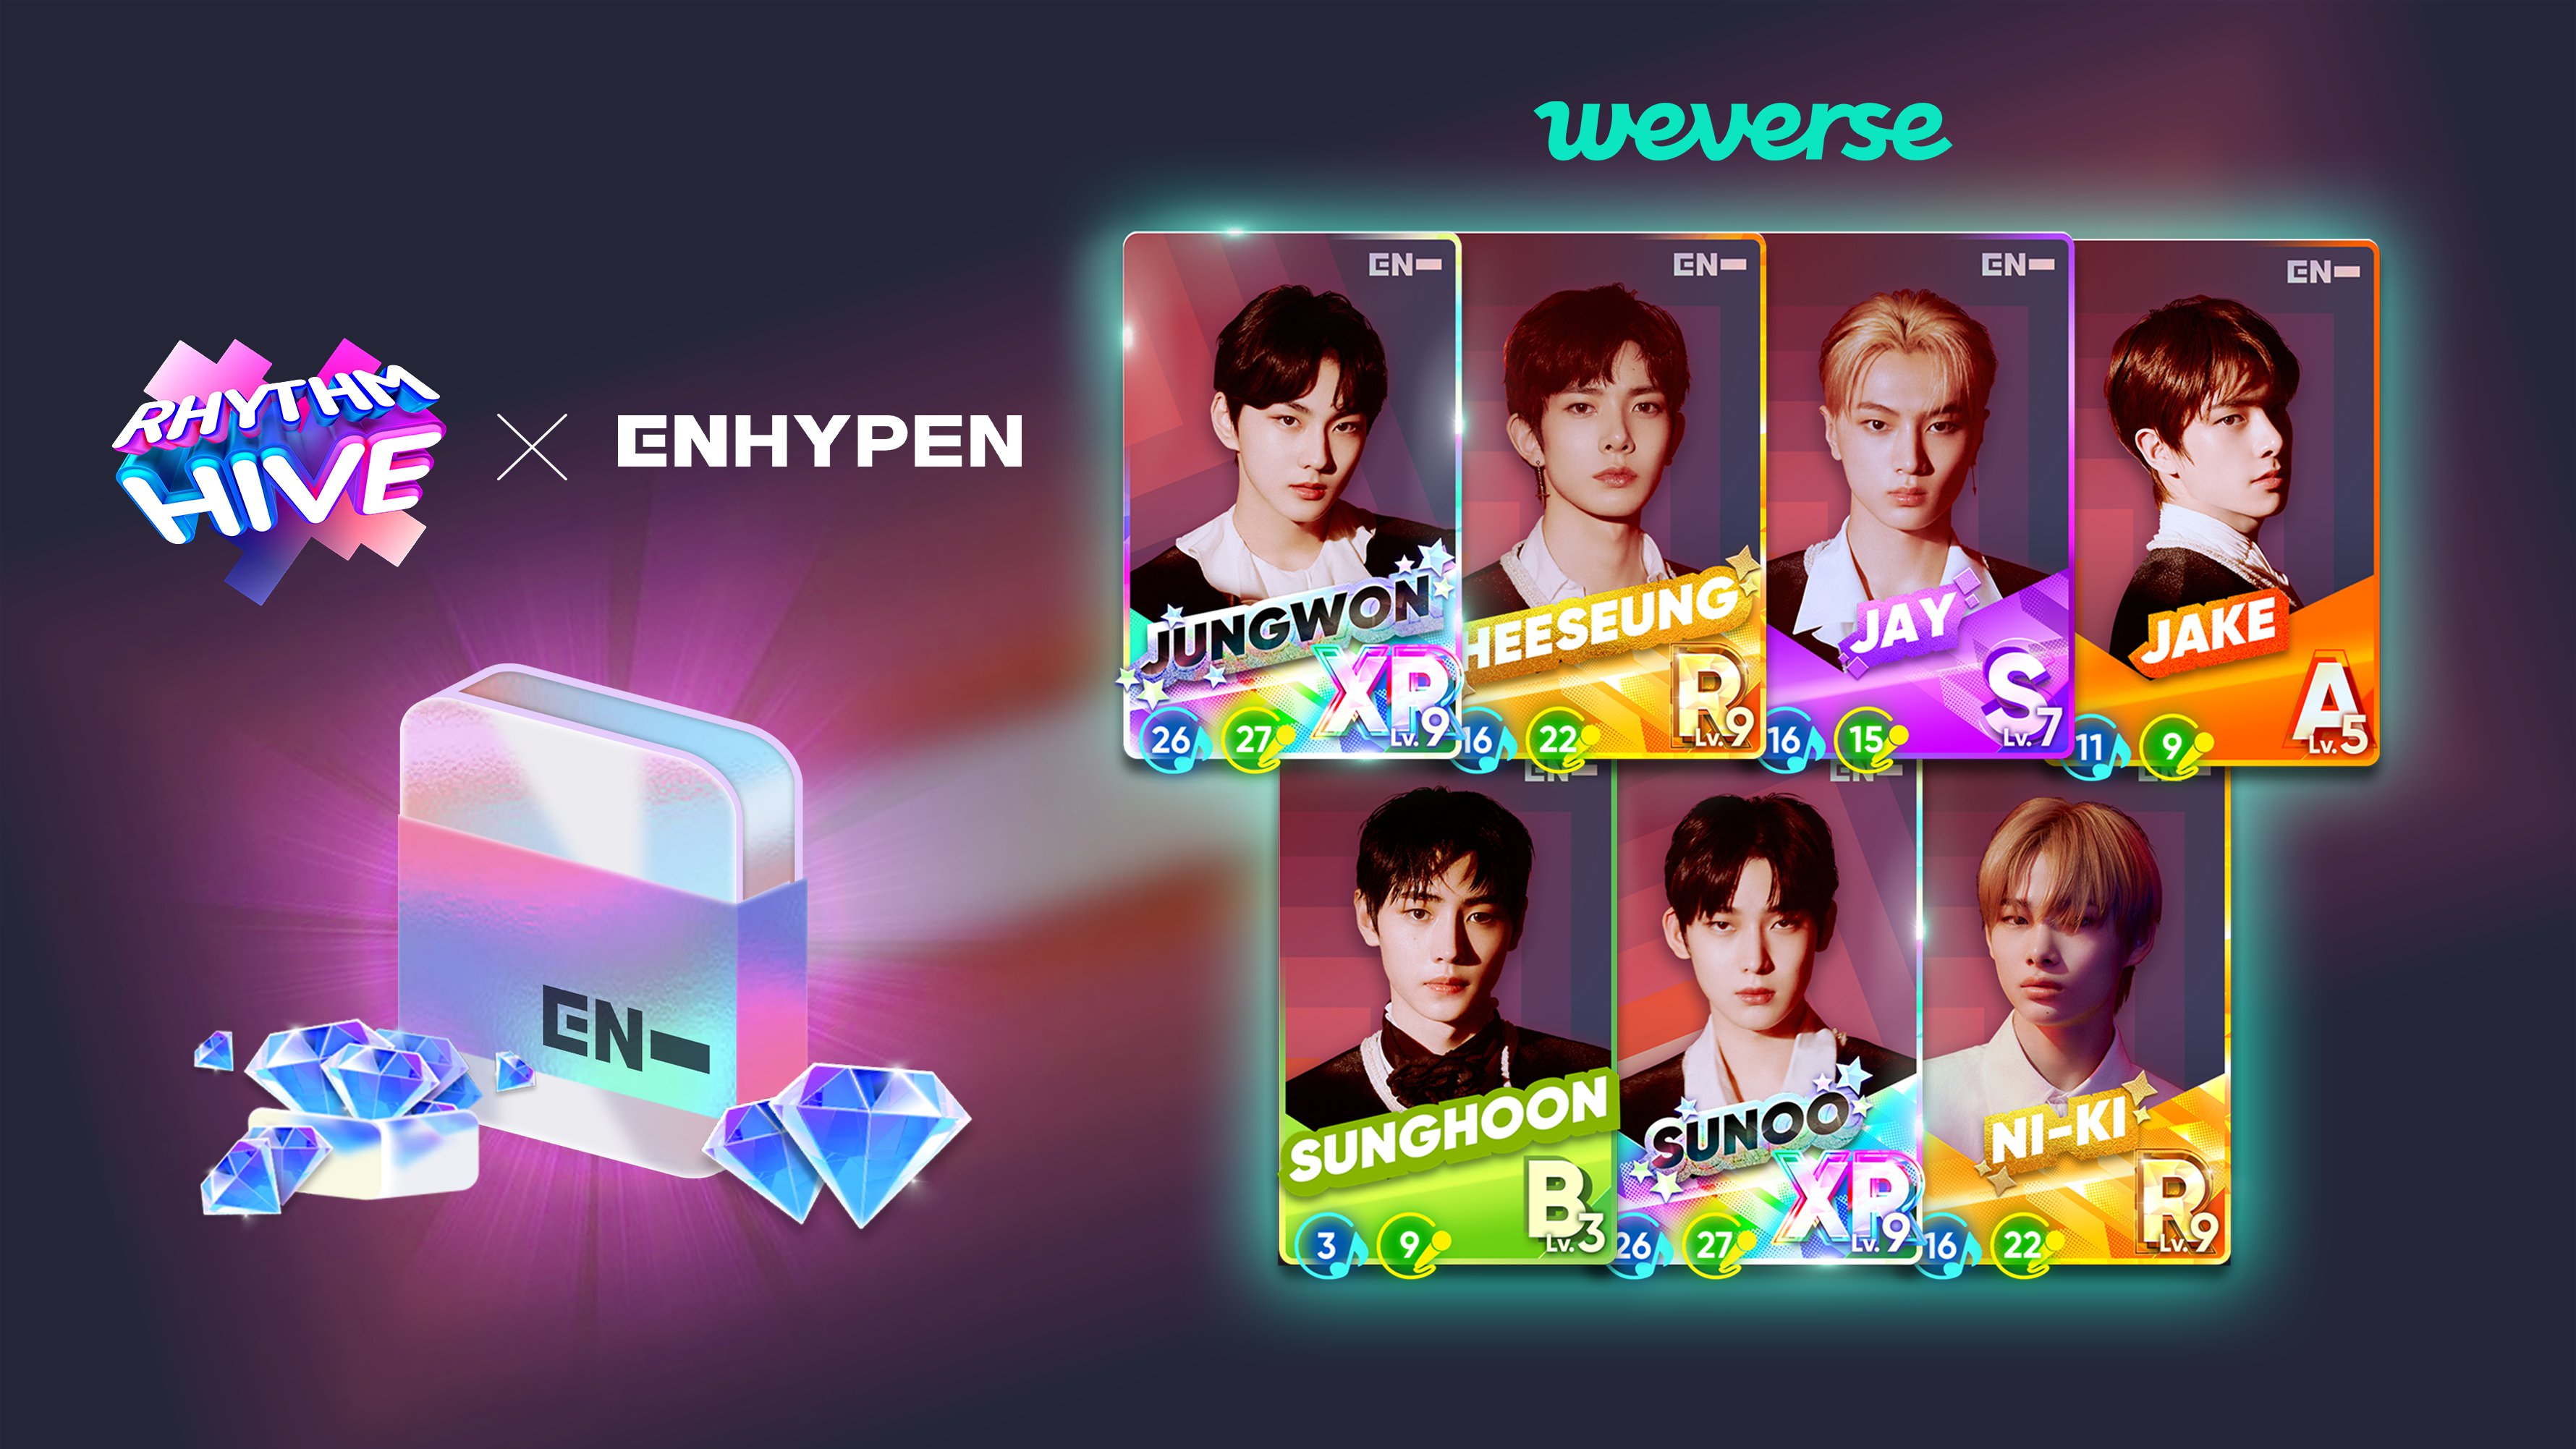 rythm-hive-enhypen-weverse-collection